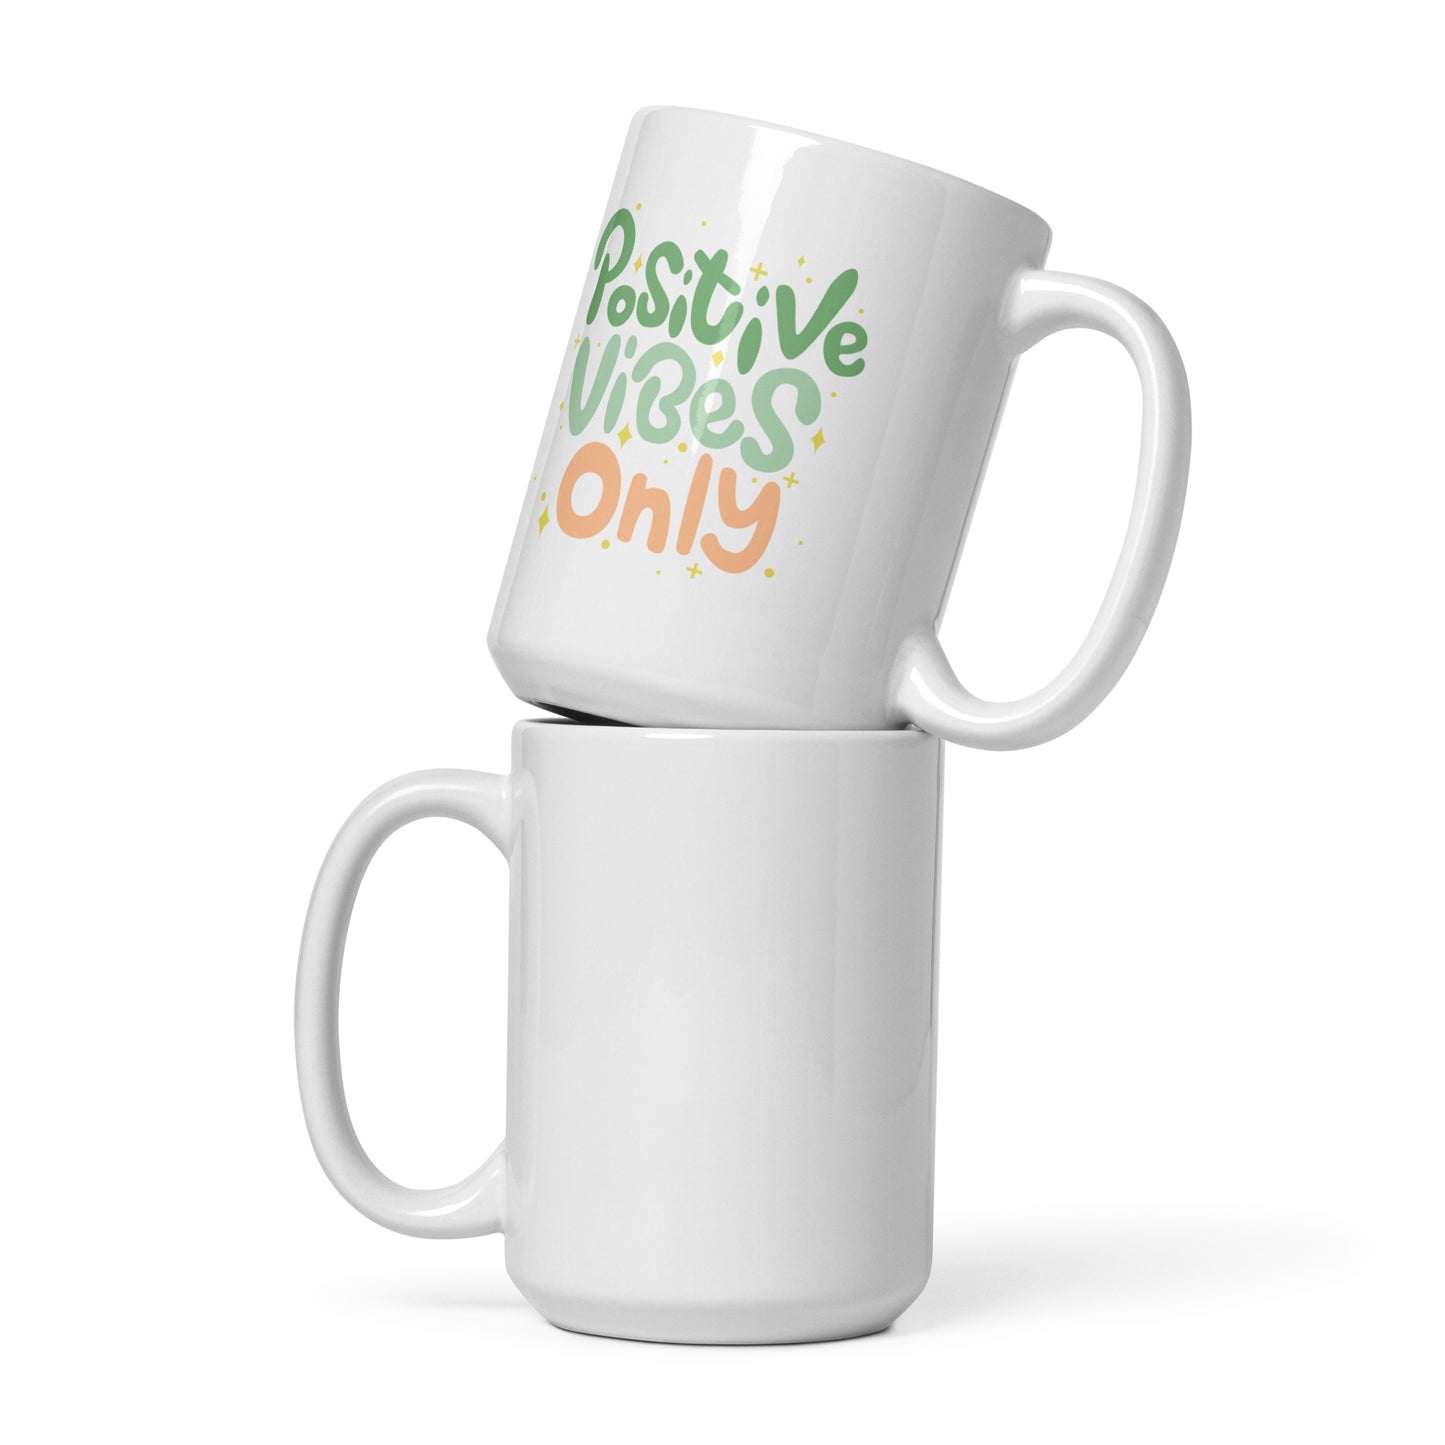 Positive Vibes Only - White glossy mug